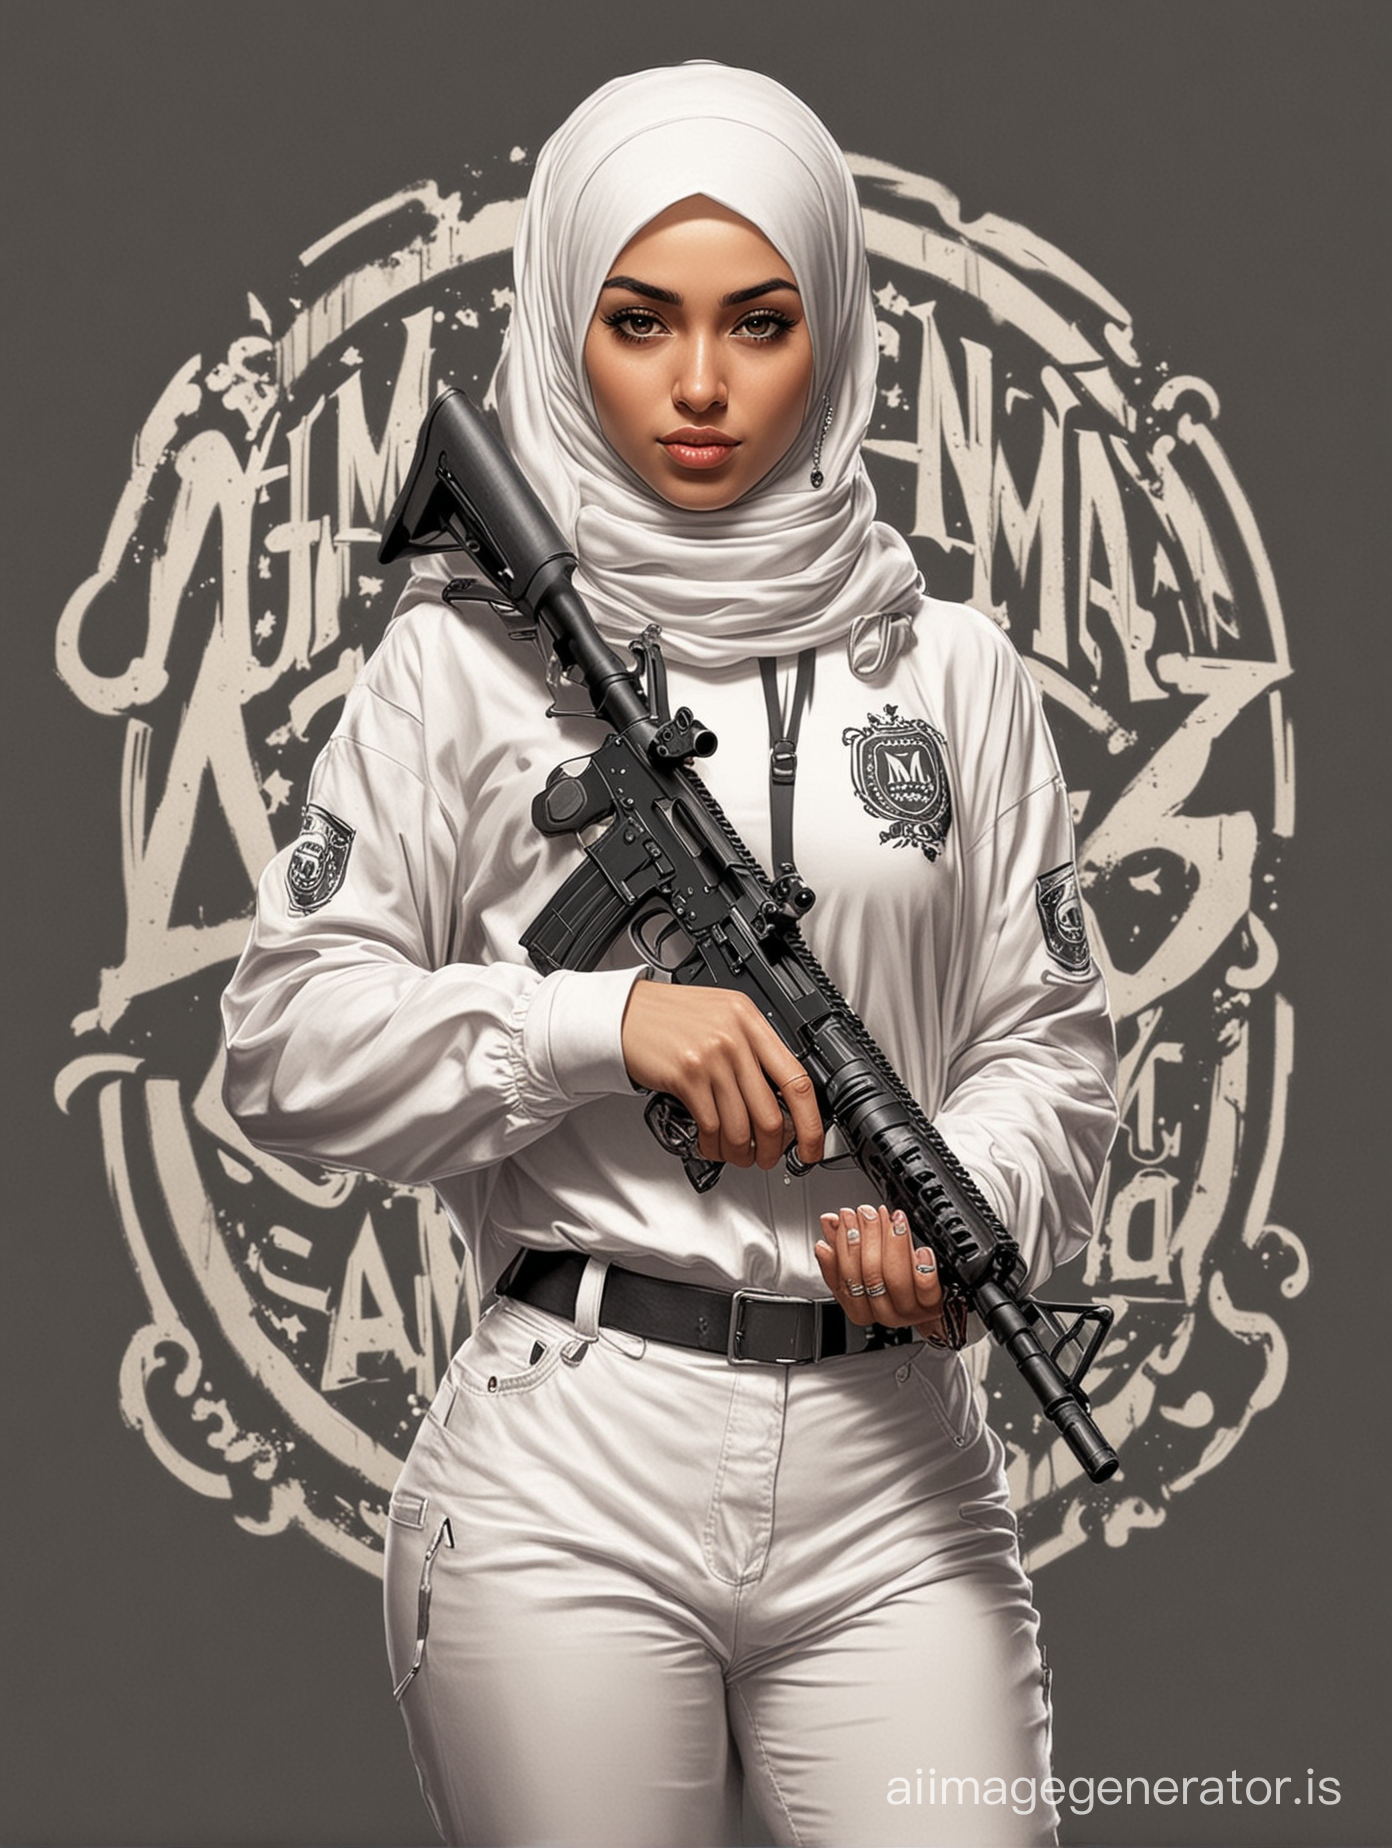 Logo of a white gangster hijab girl holding a m_4
Rifle